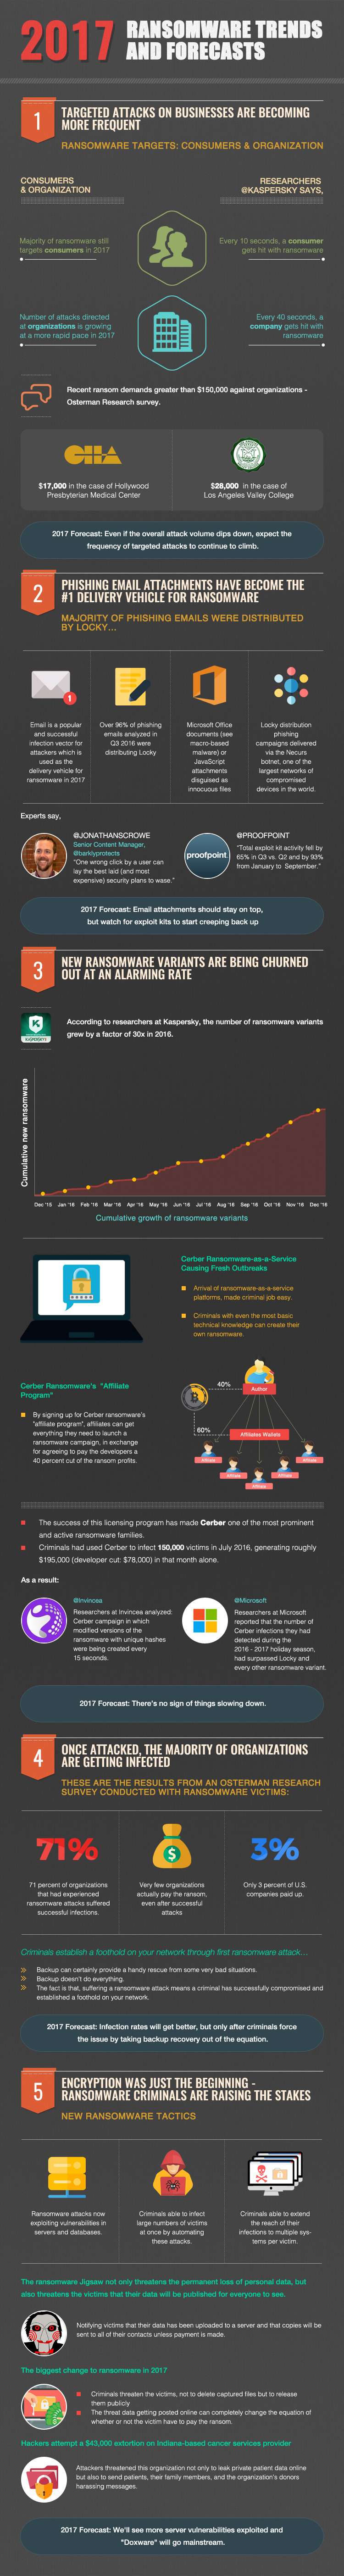 2017 Ransomware Trends and Forecasts